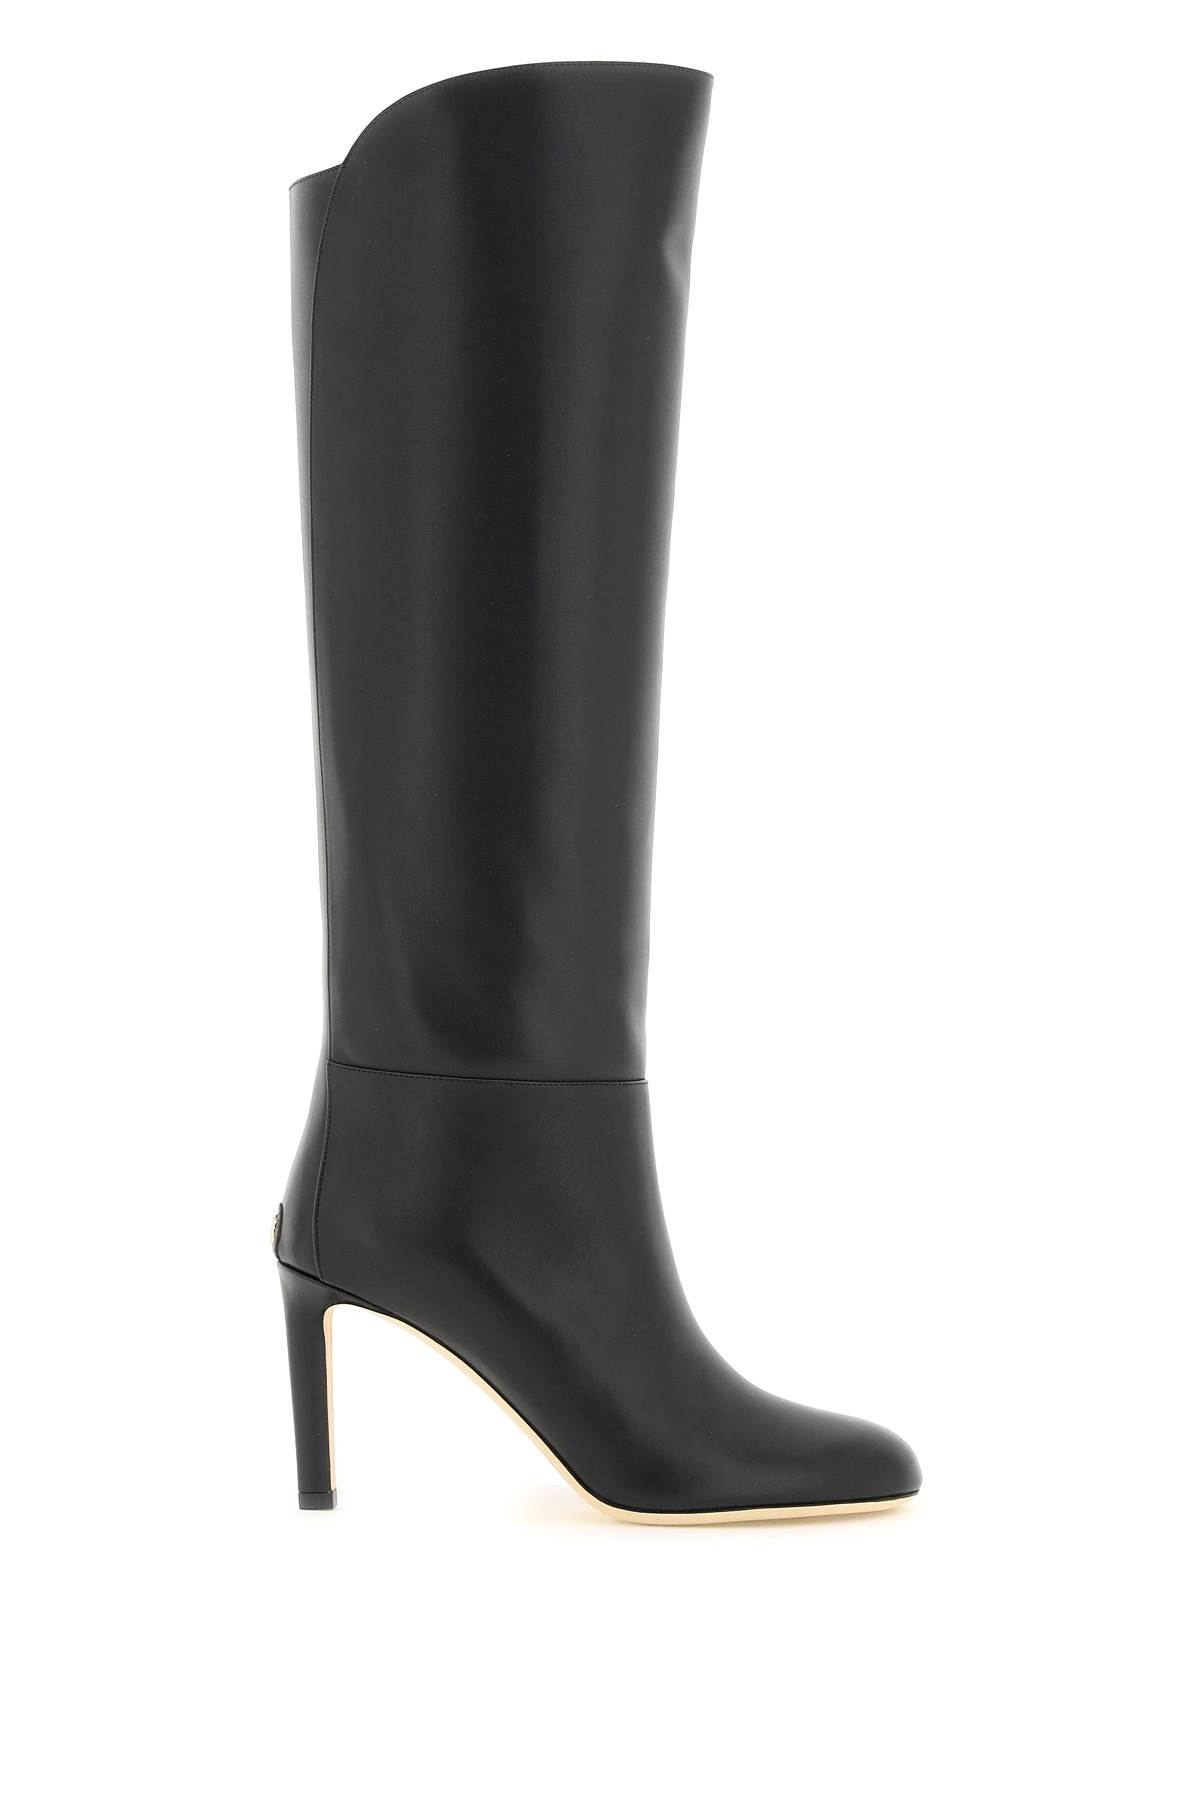 JIMMY CHOO KARTER 85 LEATHER BOOTS